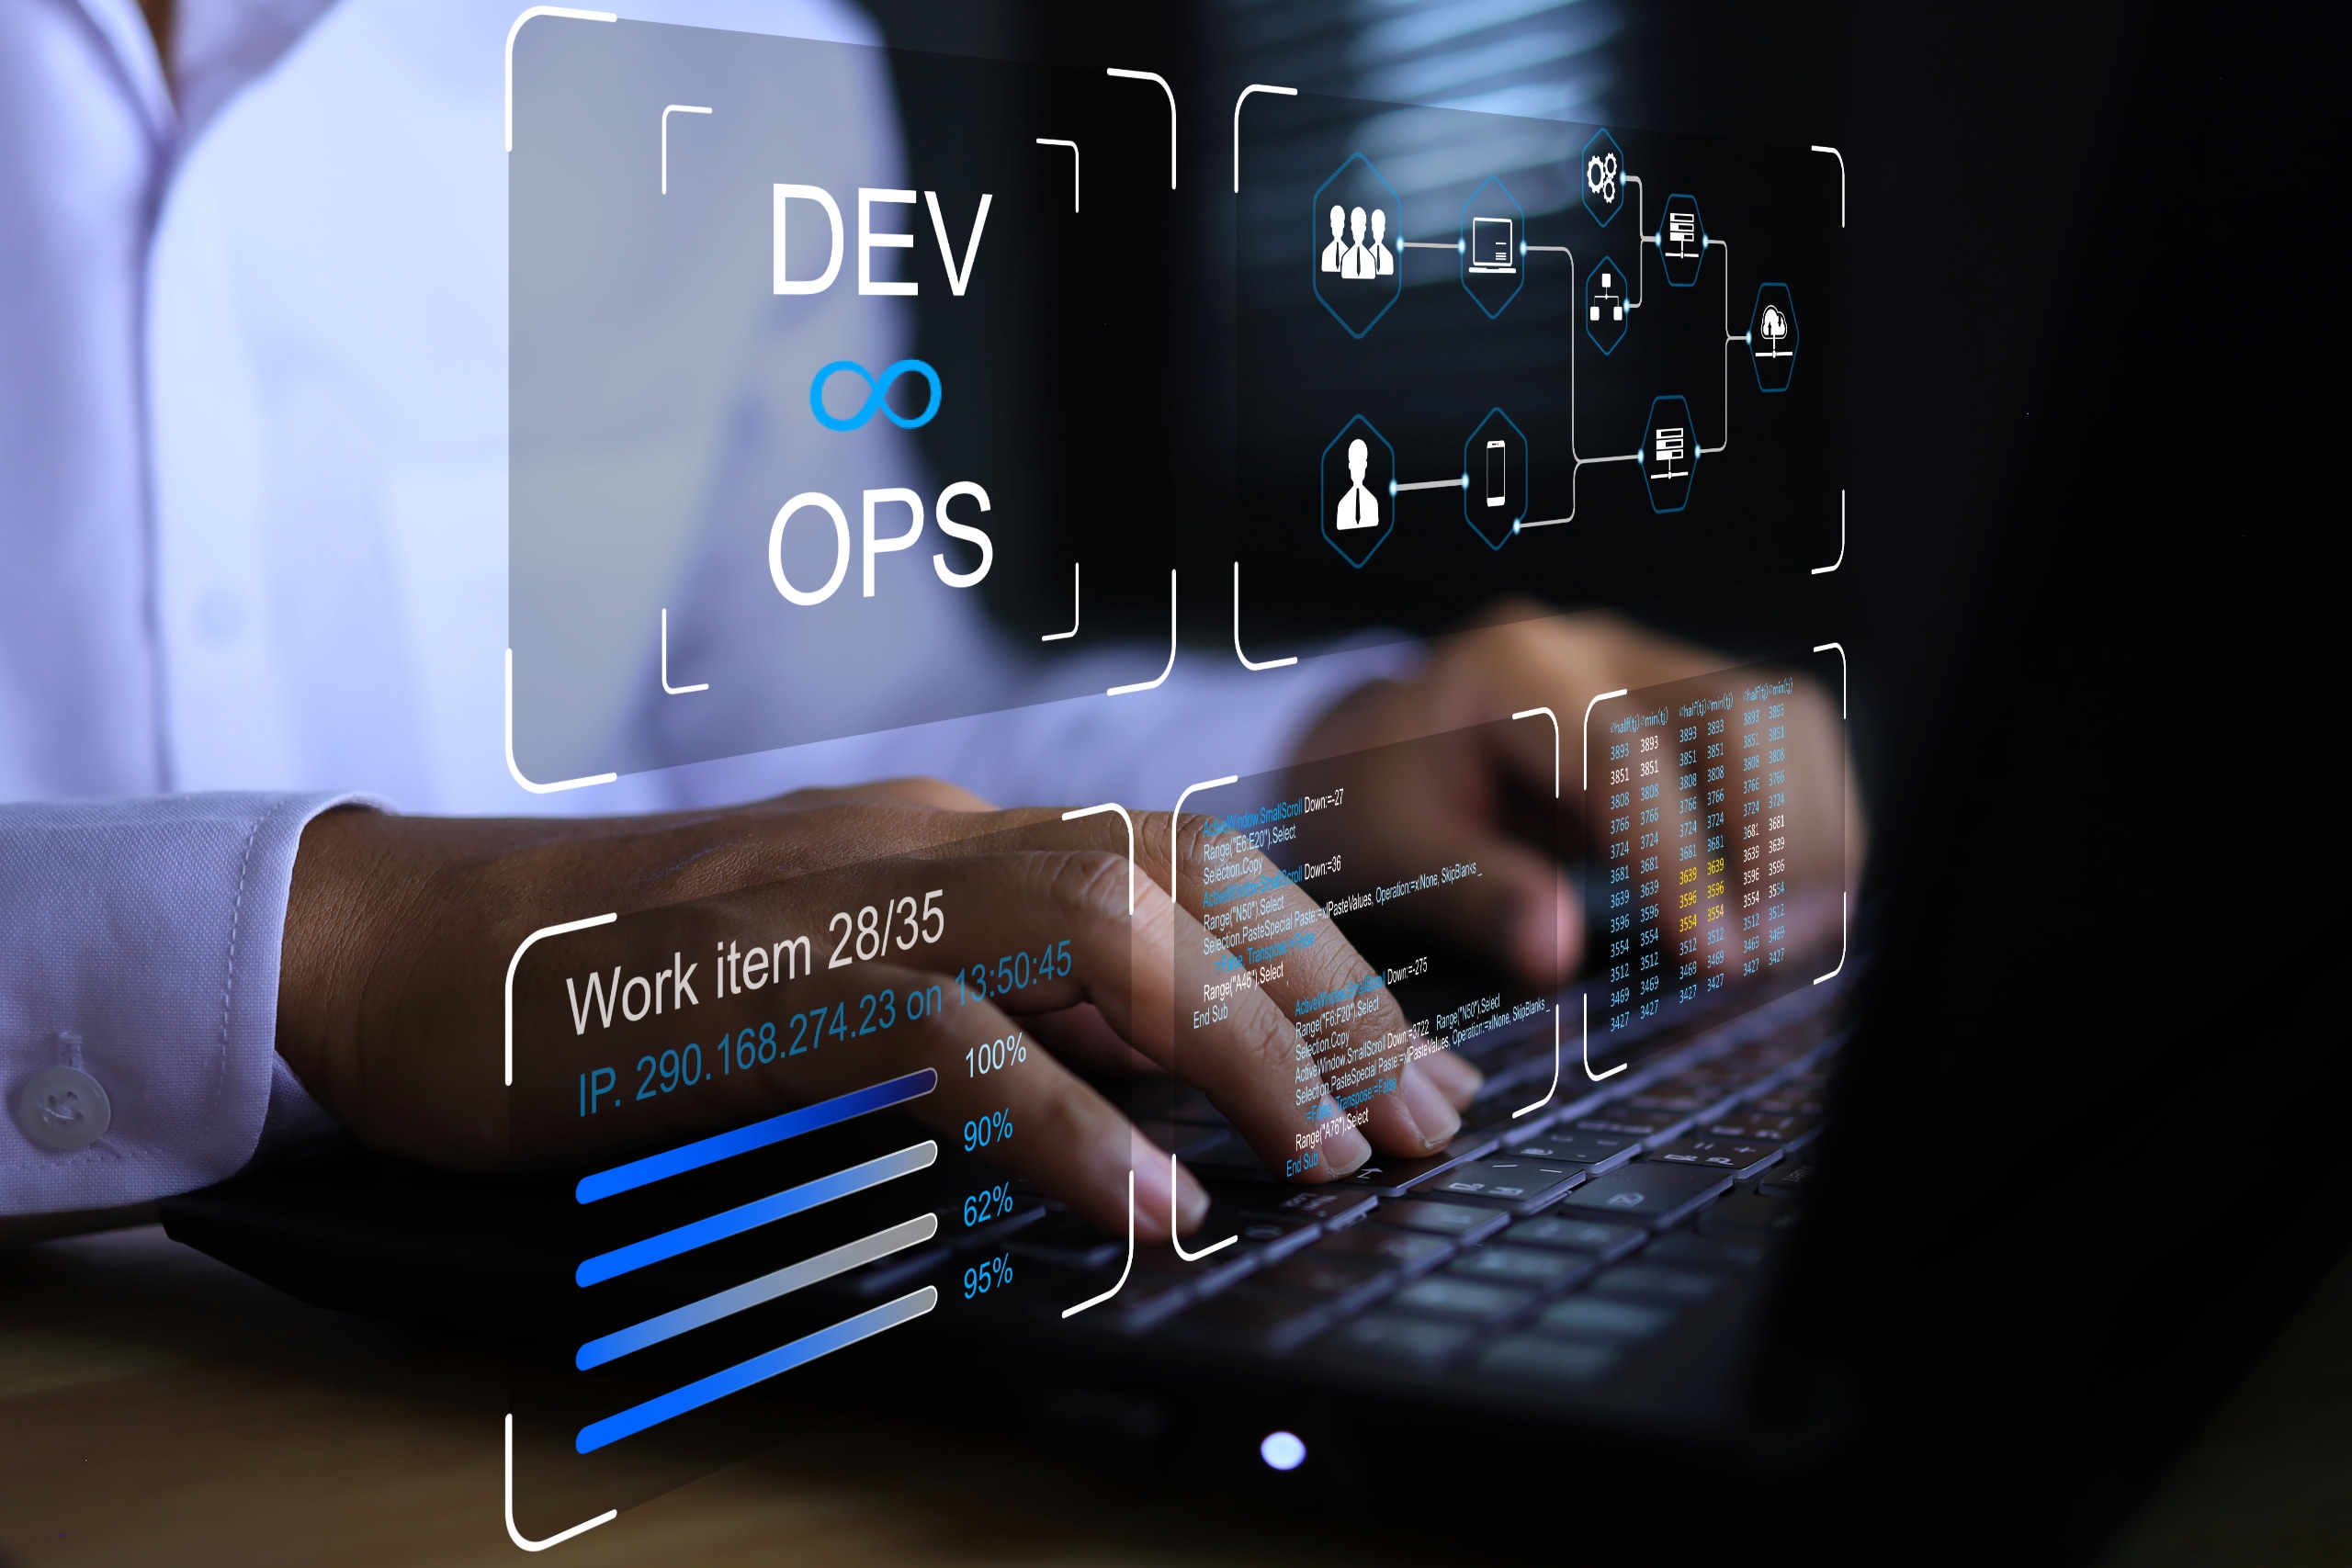 Abstract DevOps image